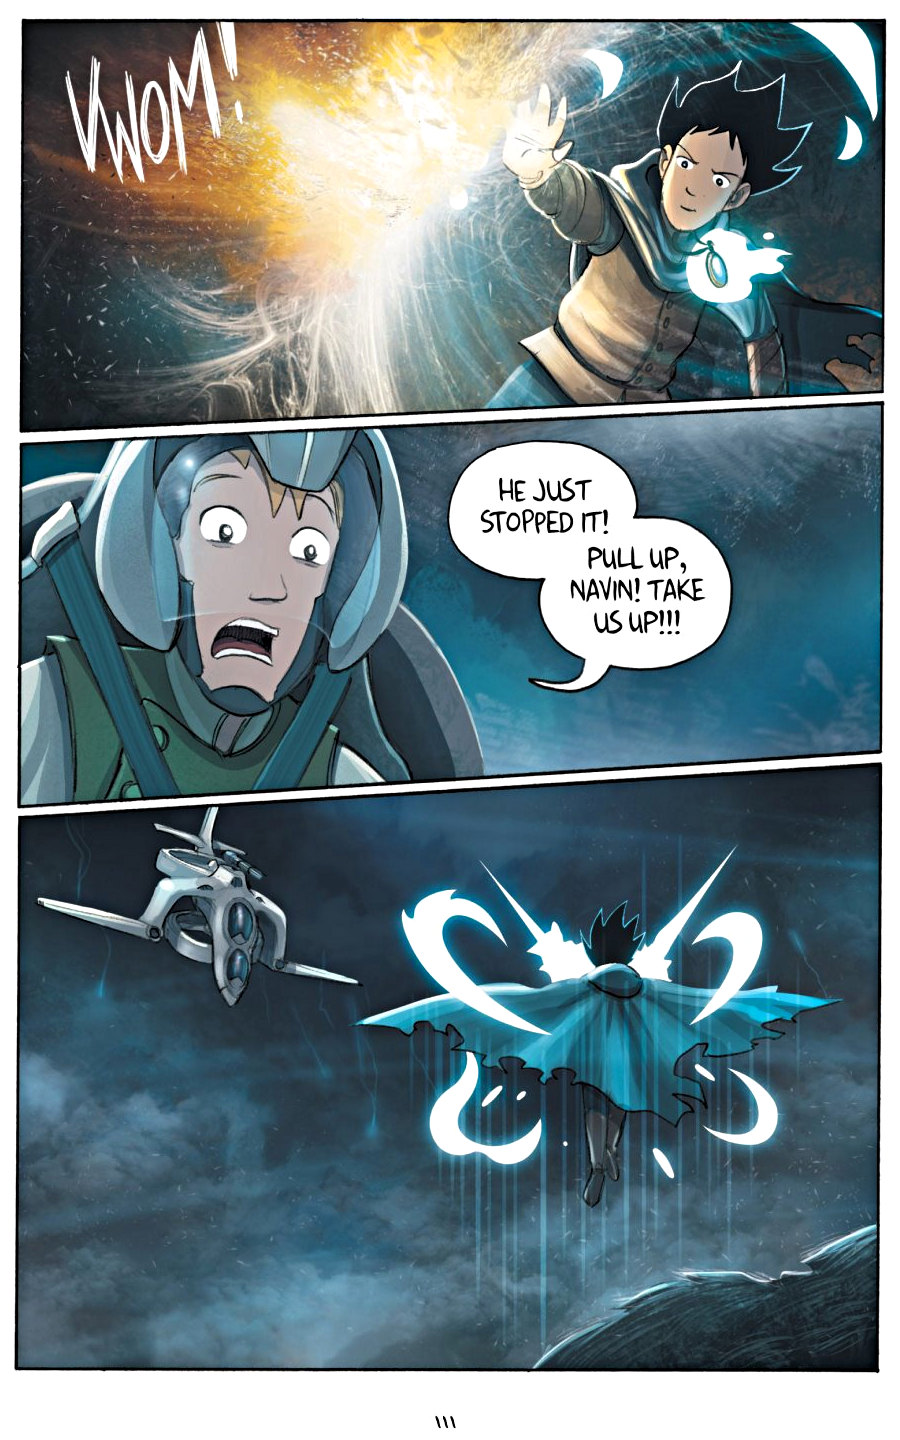 page 111 of amulet 5 prince of the elves graphic novel